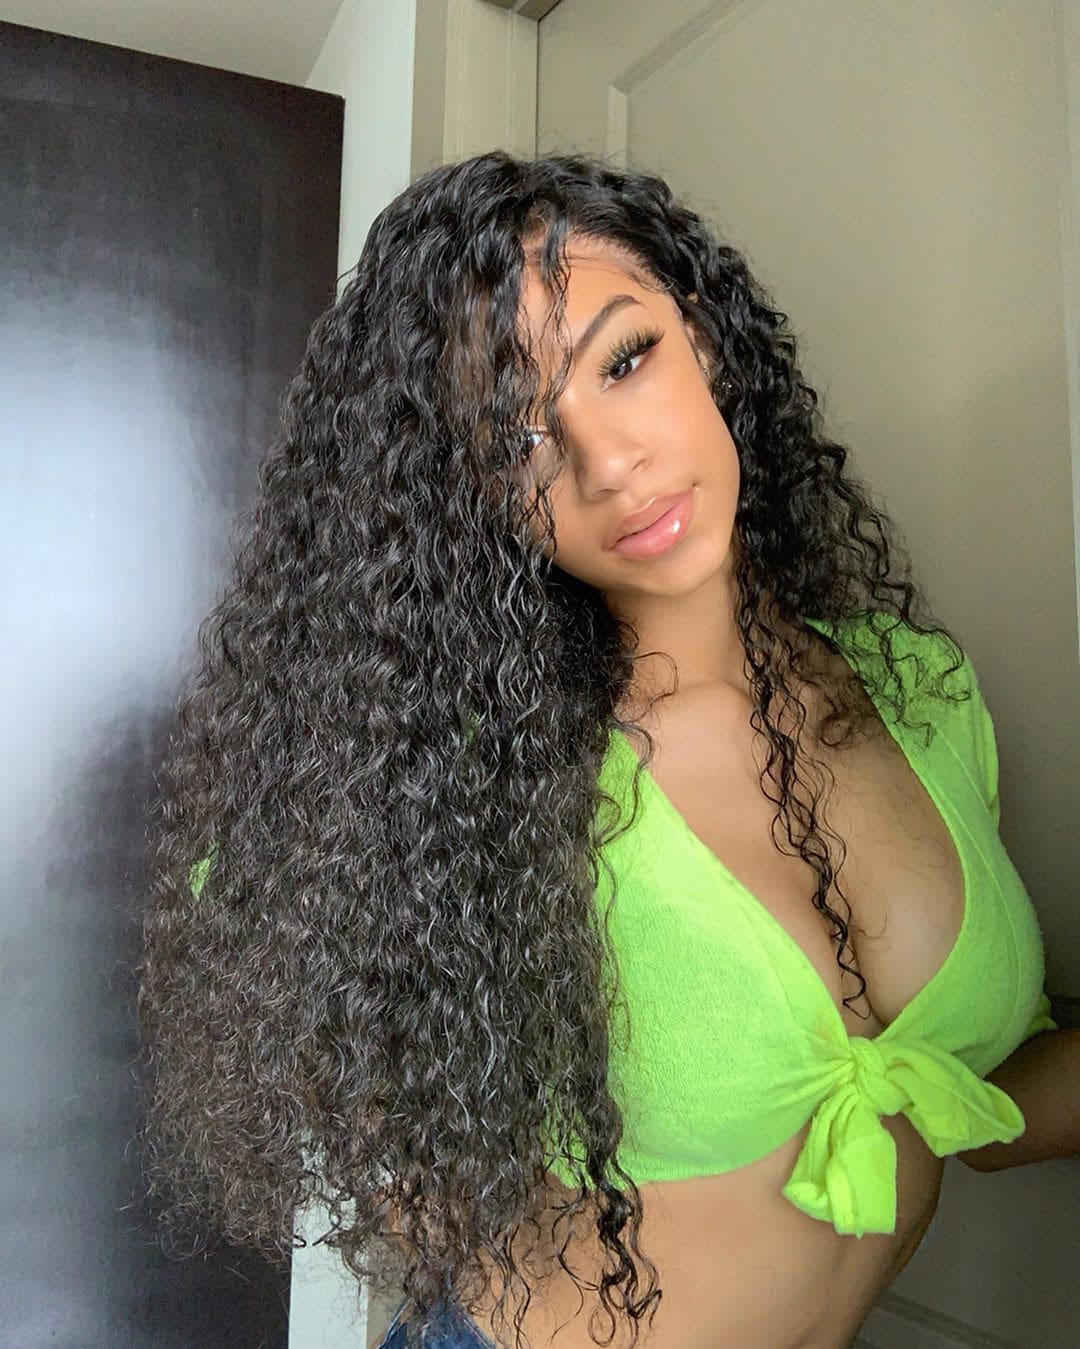 T.I.'s Daughter, Deyjah Harris Makes Fans Crazy With Excitement With These Never-Before-Seen Photos! Enjoy Her New Pics Here - She Also Addresses Mental Health